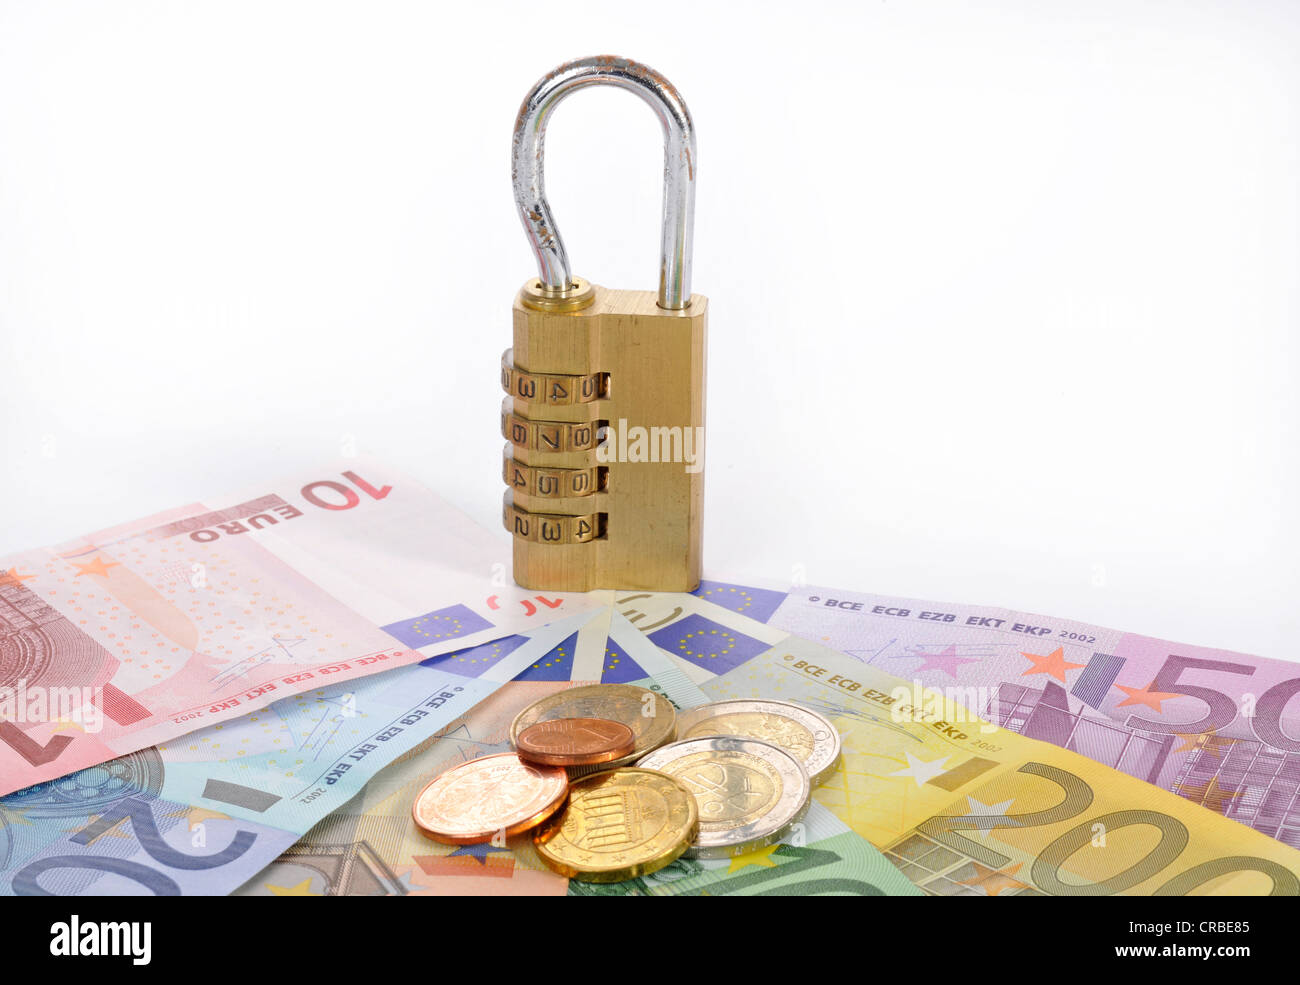 Combination lock on euro banknotes and coins, symbolic image of monetary security Stock Photo